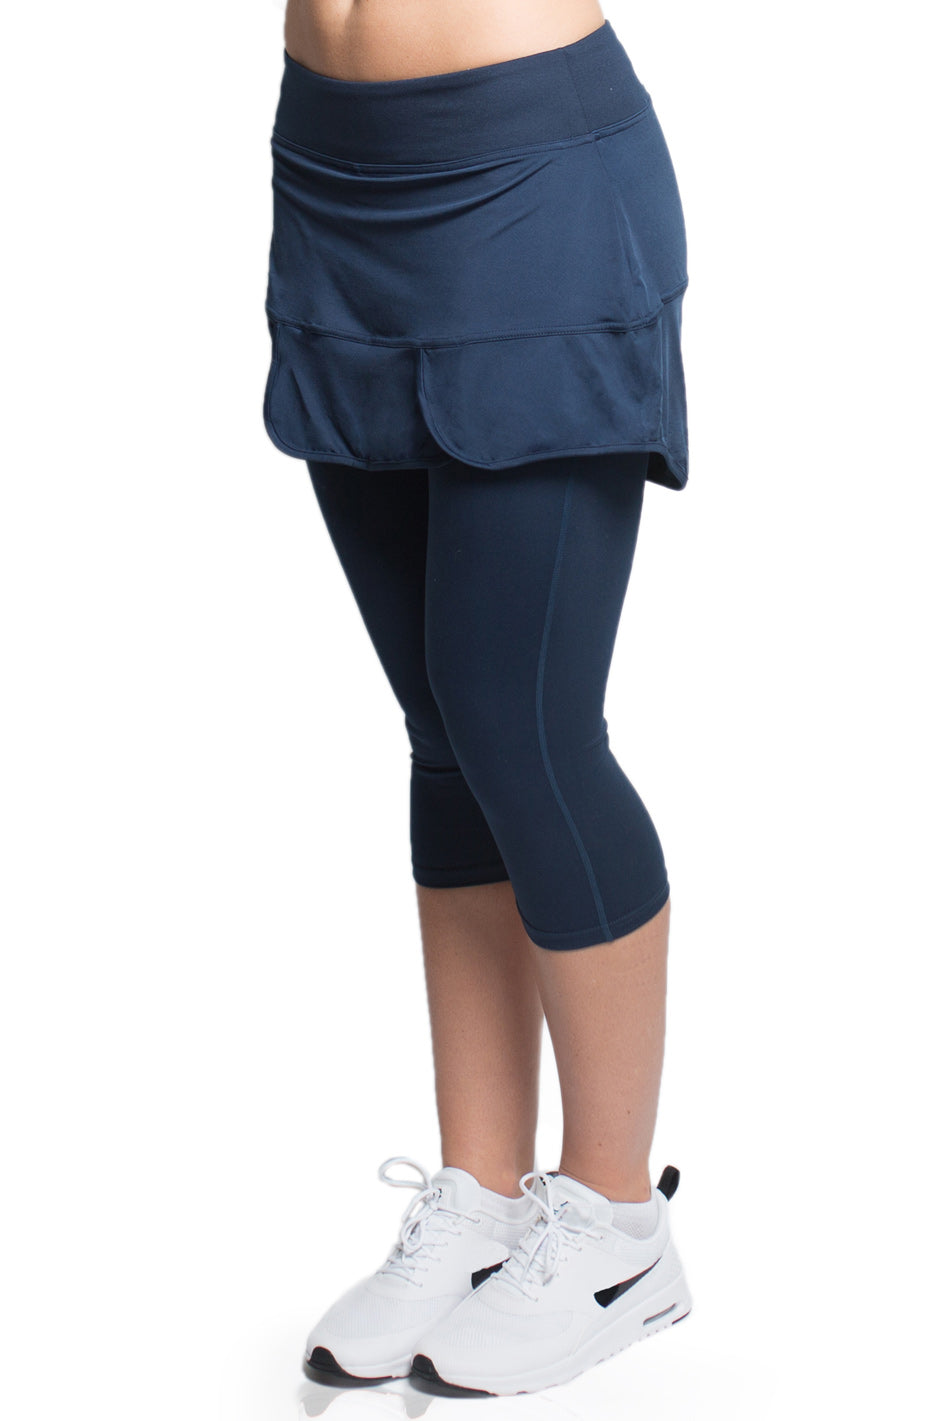 Side view of a woman dressed in the blue Alex + Abby Endurance Skirted Capri Legging